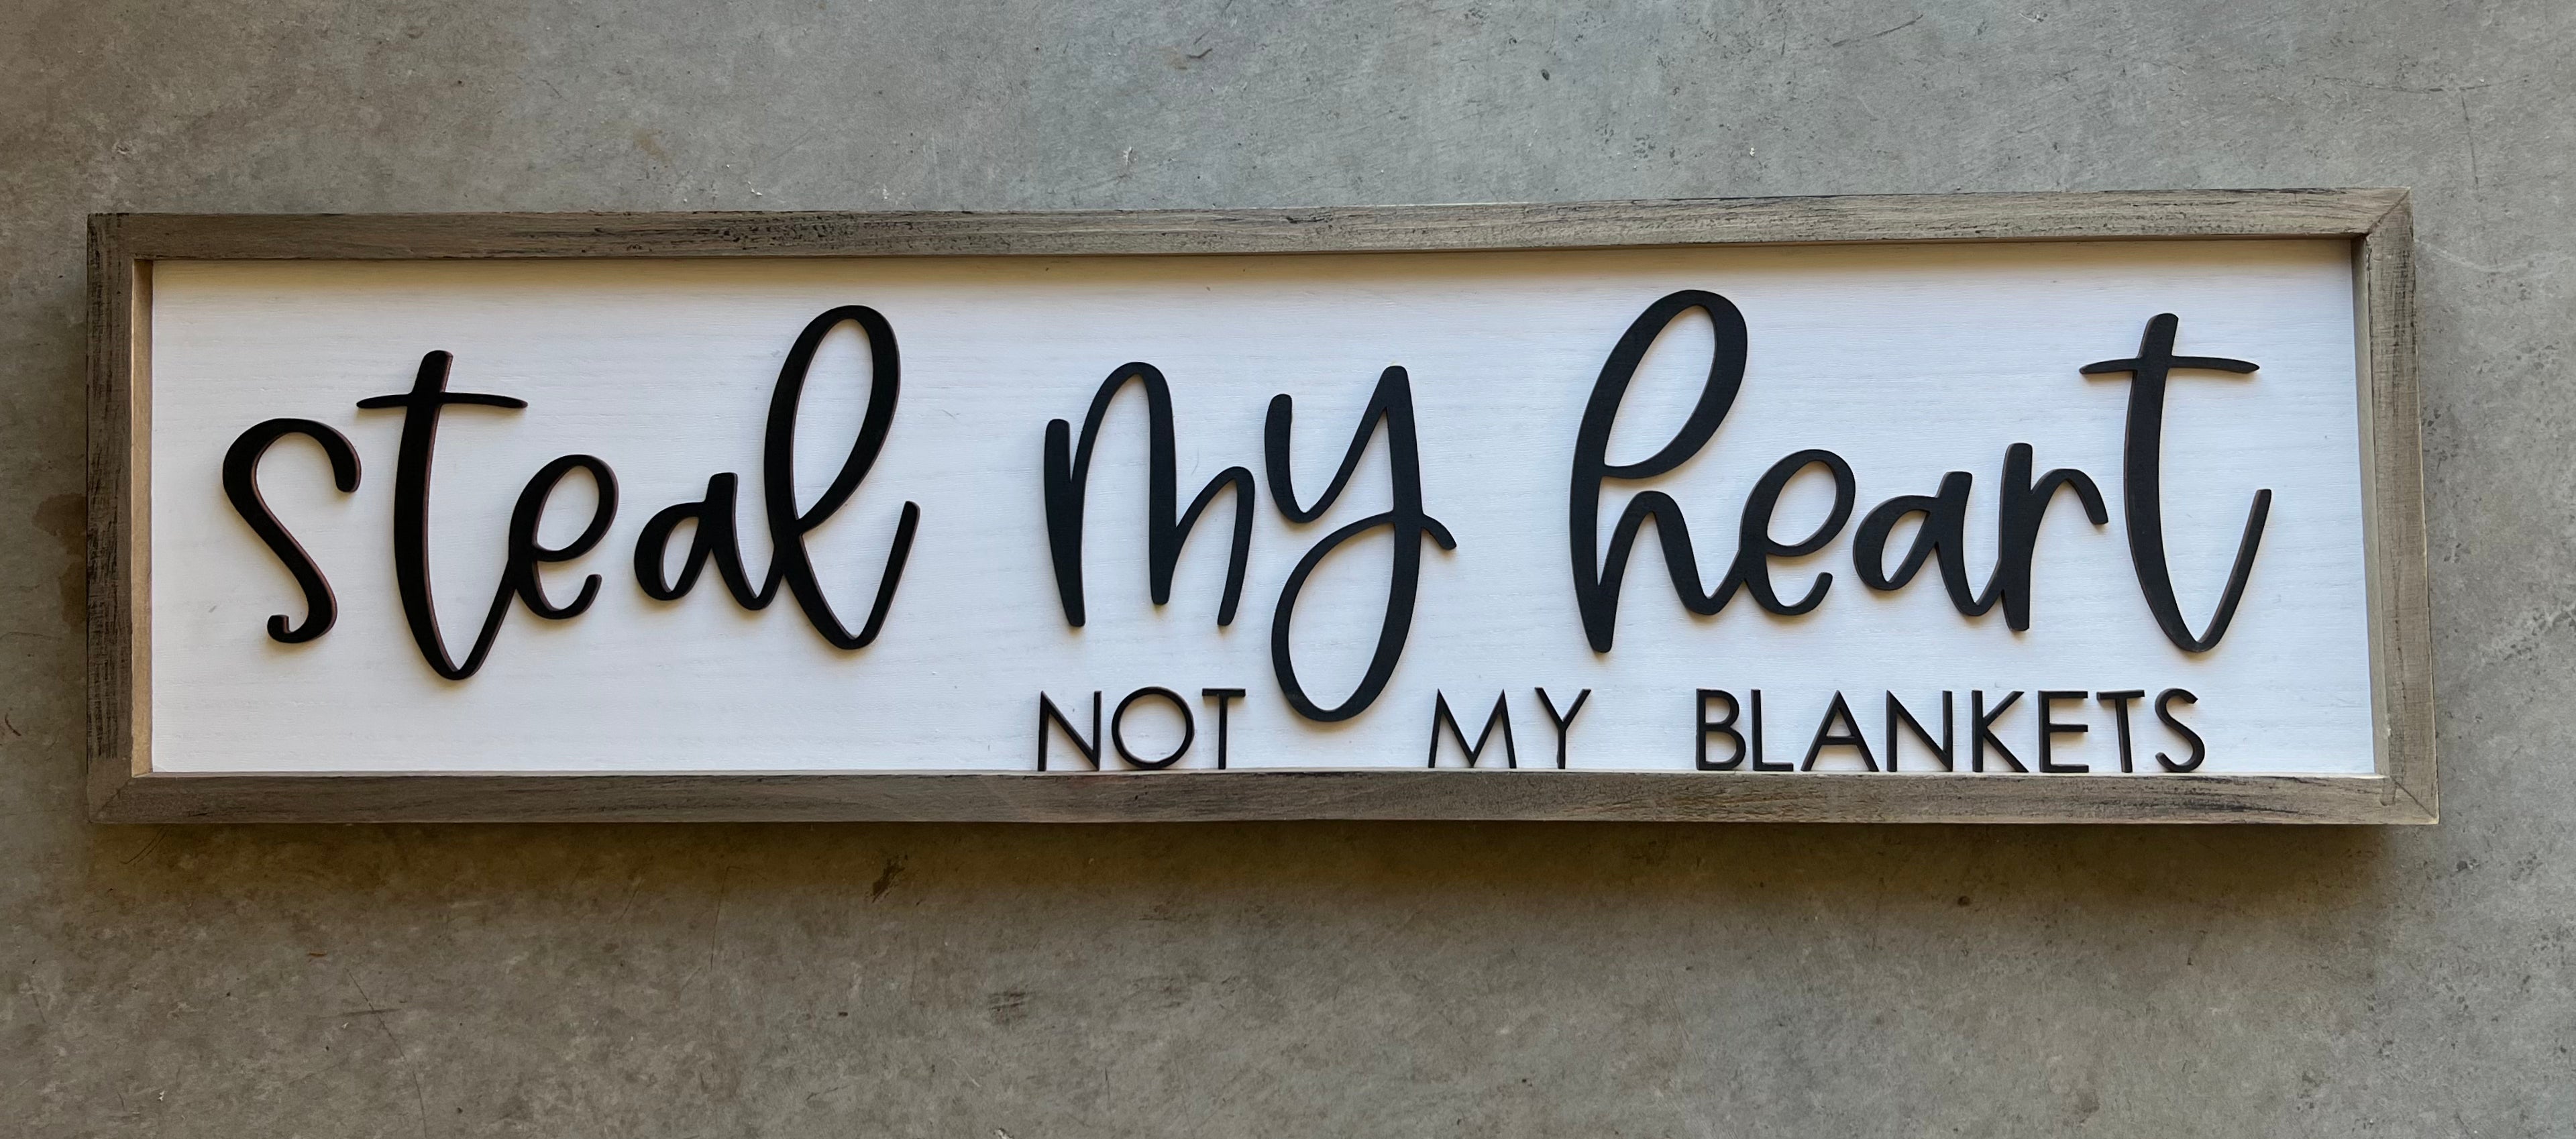 wooden sign with the quote "steal my heart not my blankets"